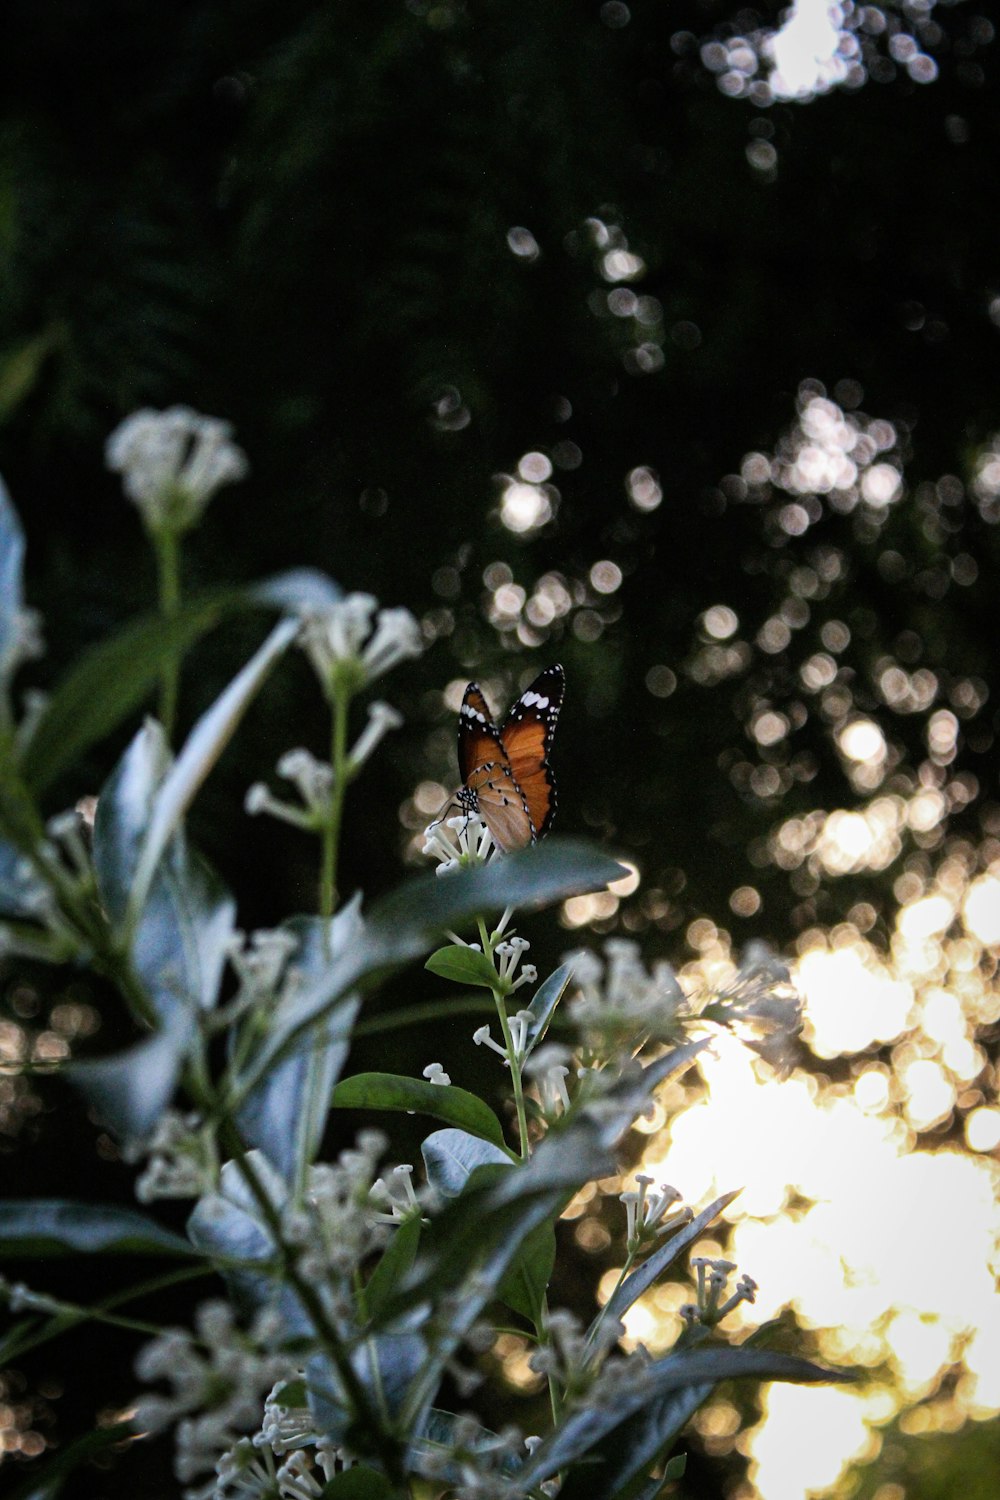 orange and black butterfly perched on green plant during daytime